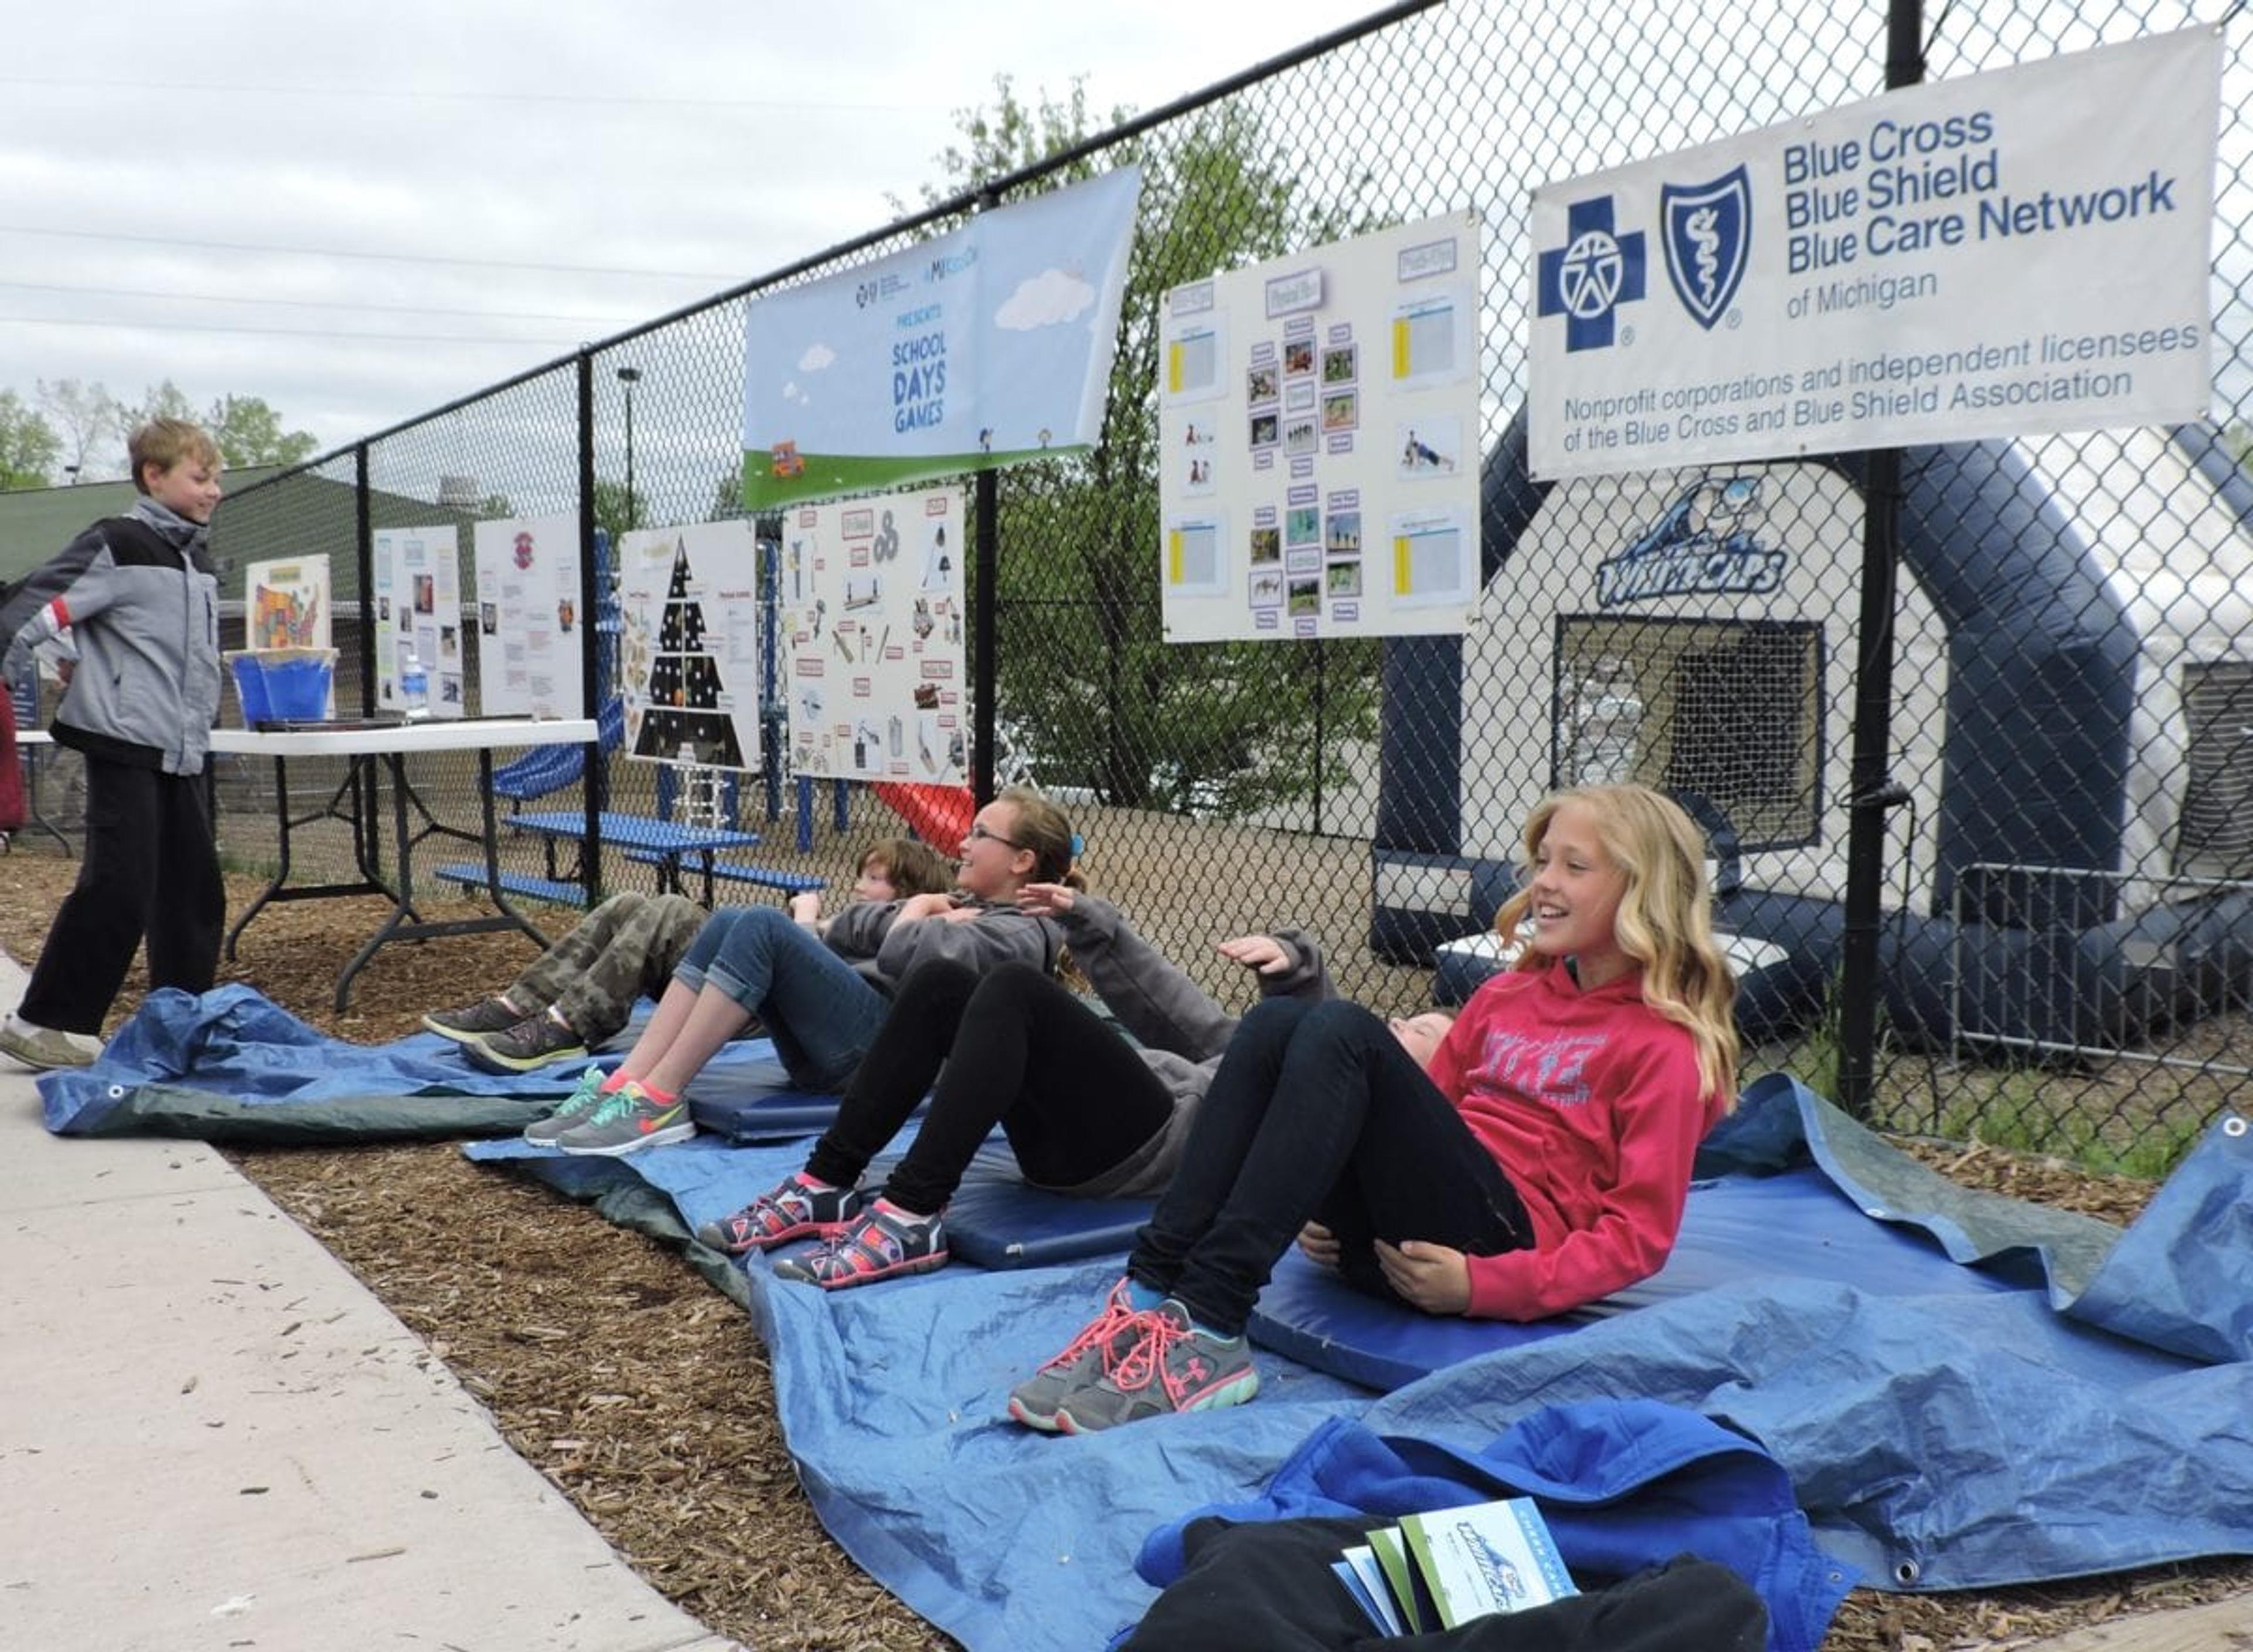 A sit-up competition station was part of the fun at today's West Michigan Whitecaps School Days Game, presented by Blue Cross Blue Shield of Michigan.